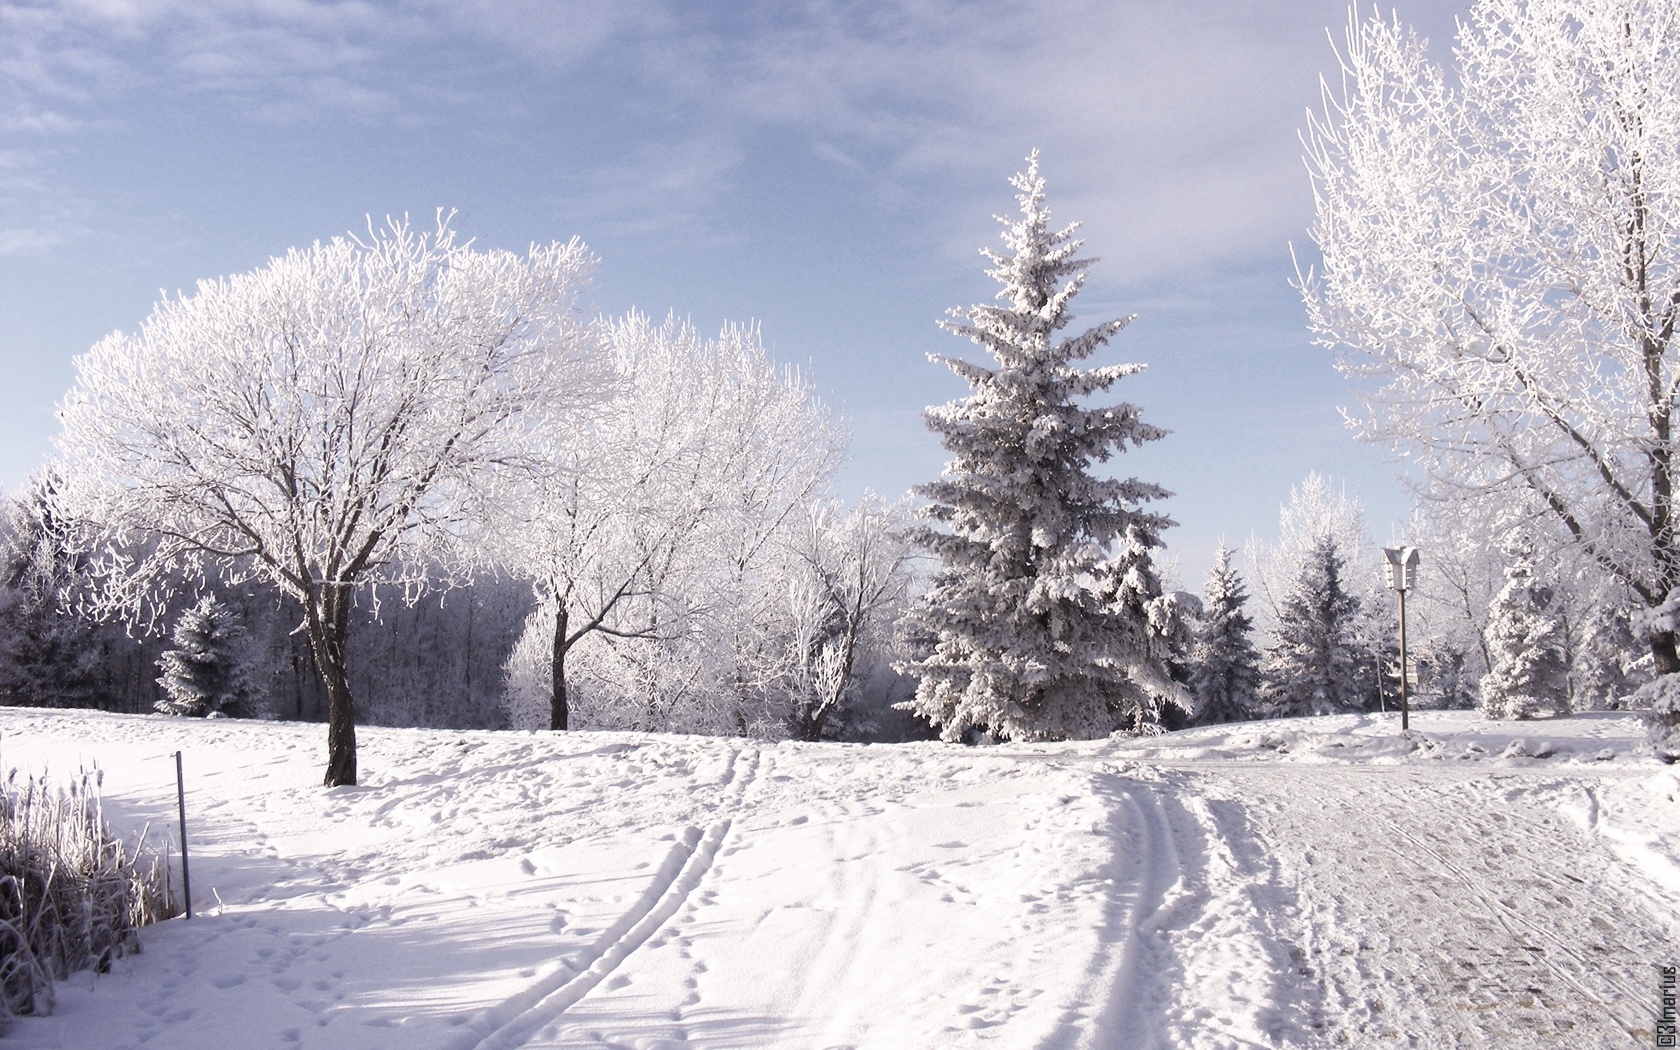 Winter HD Wallpapers Pictures Images Backgrounds Photos 1680x1050